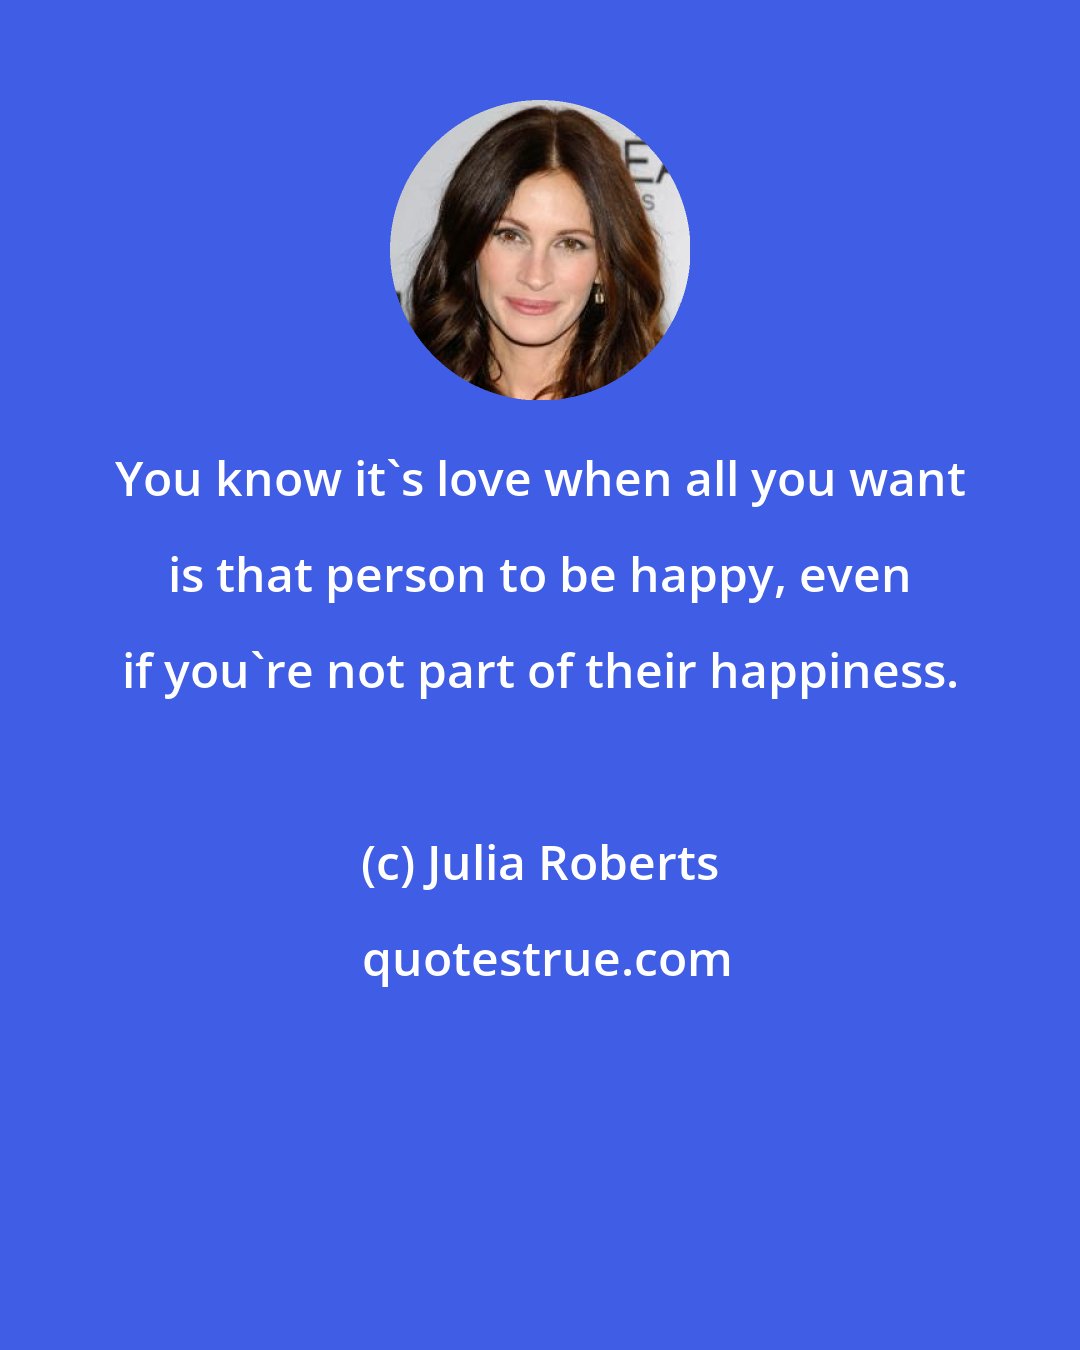 Julia Roberts: You know it's love when all you want is that person to be happy, even if you're not part of their happiness.